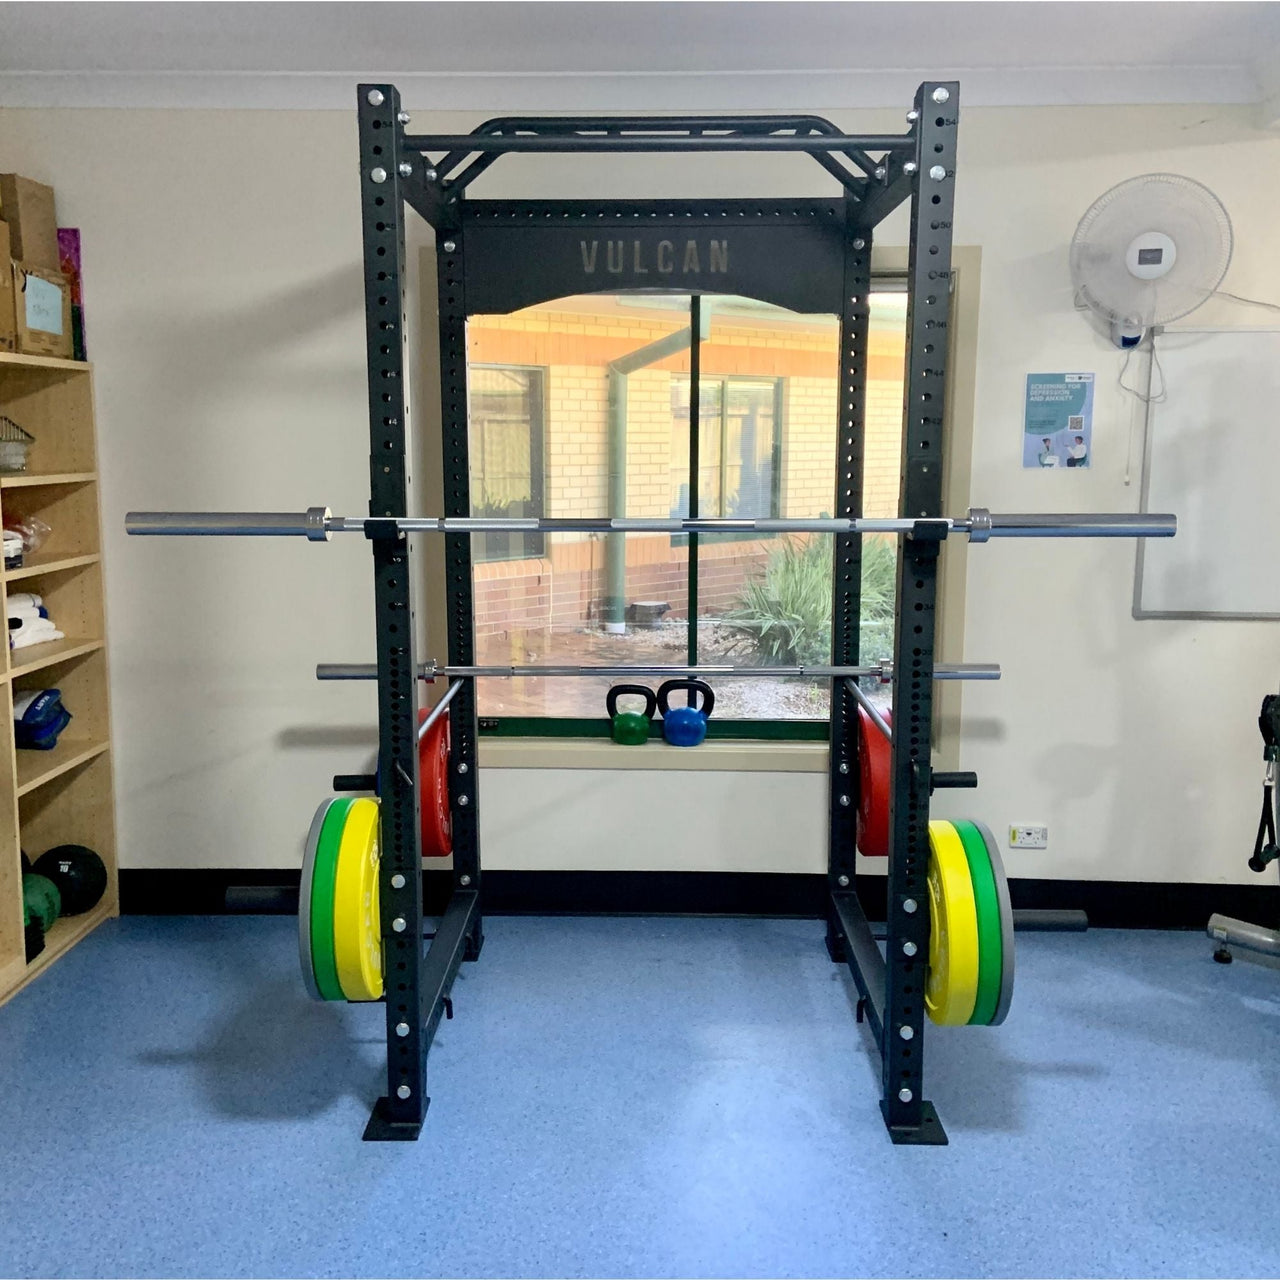 VULCAN Atlas Power Rack, Olympic Barbell, 150kg Black Bumper Weight Plates & Pro Adjustable Bench | IN STOCK